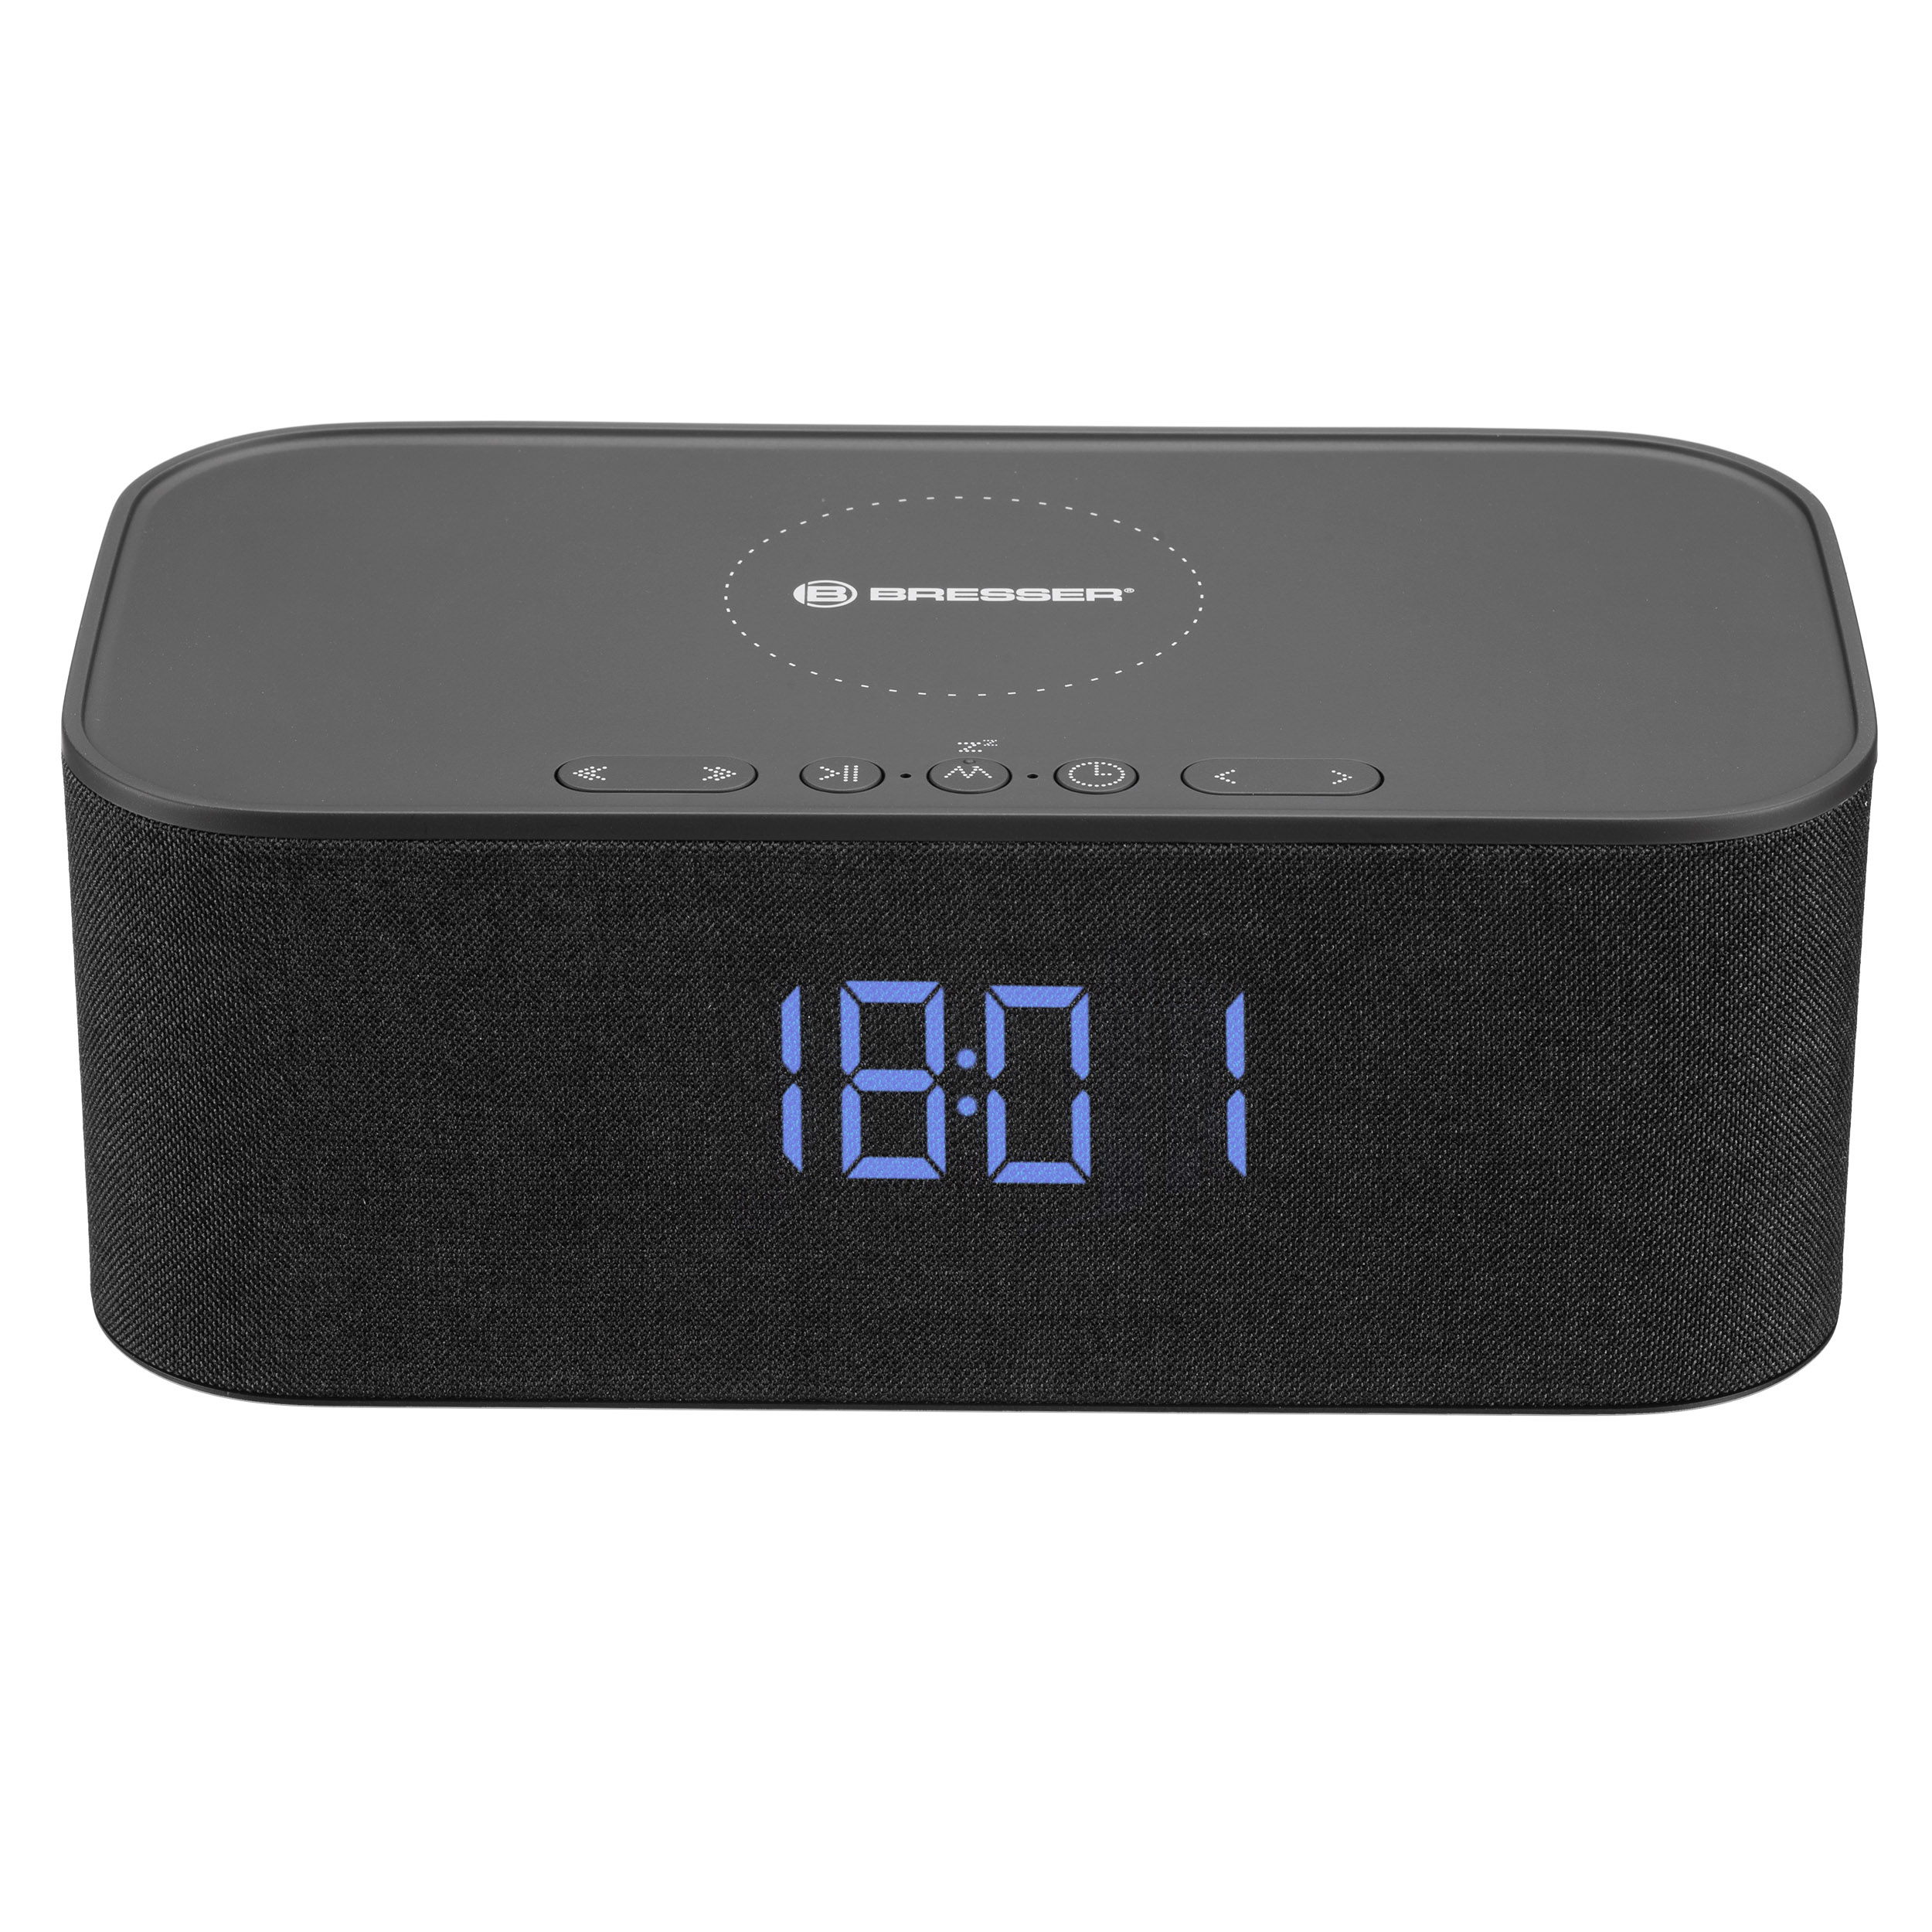 BRESSER Bluetooth speaker with alarm clock and wireless charging function (Refurbished)